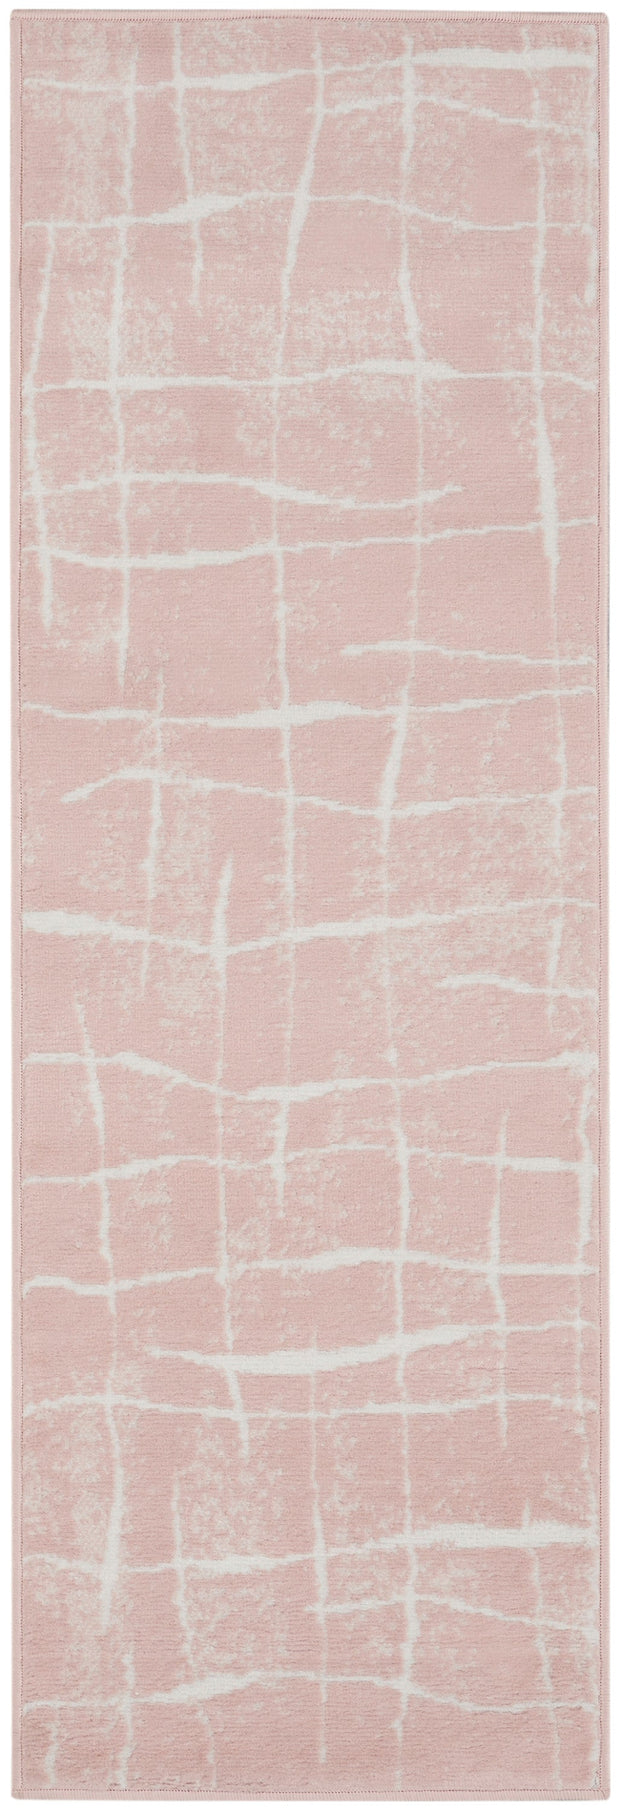 whimsicle pink ivory rug by nourison 99446833068 redo 3